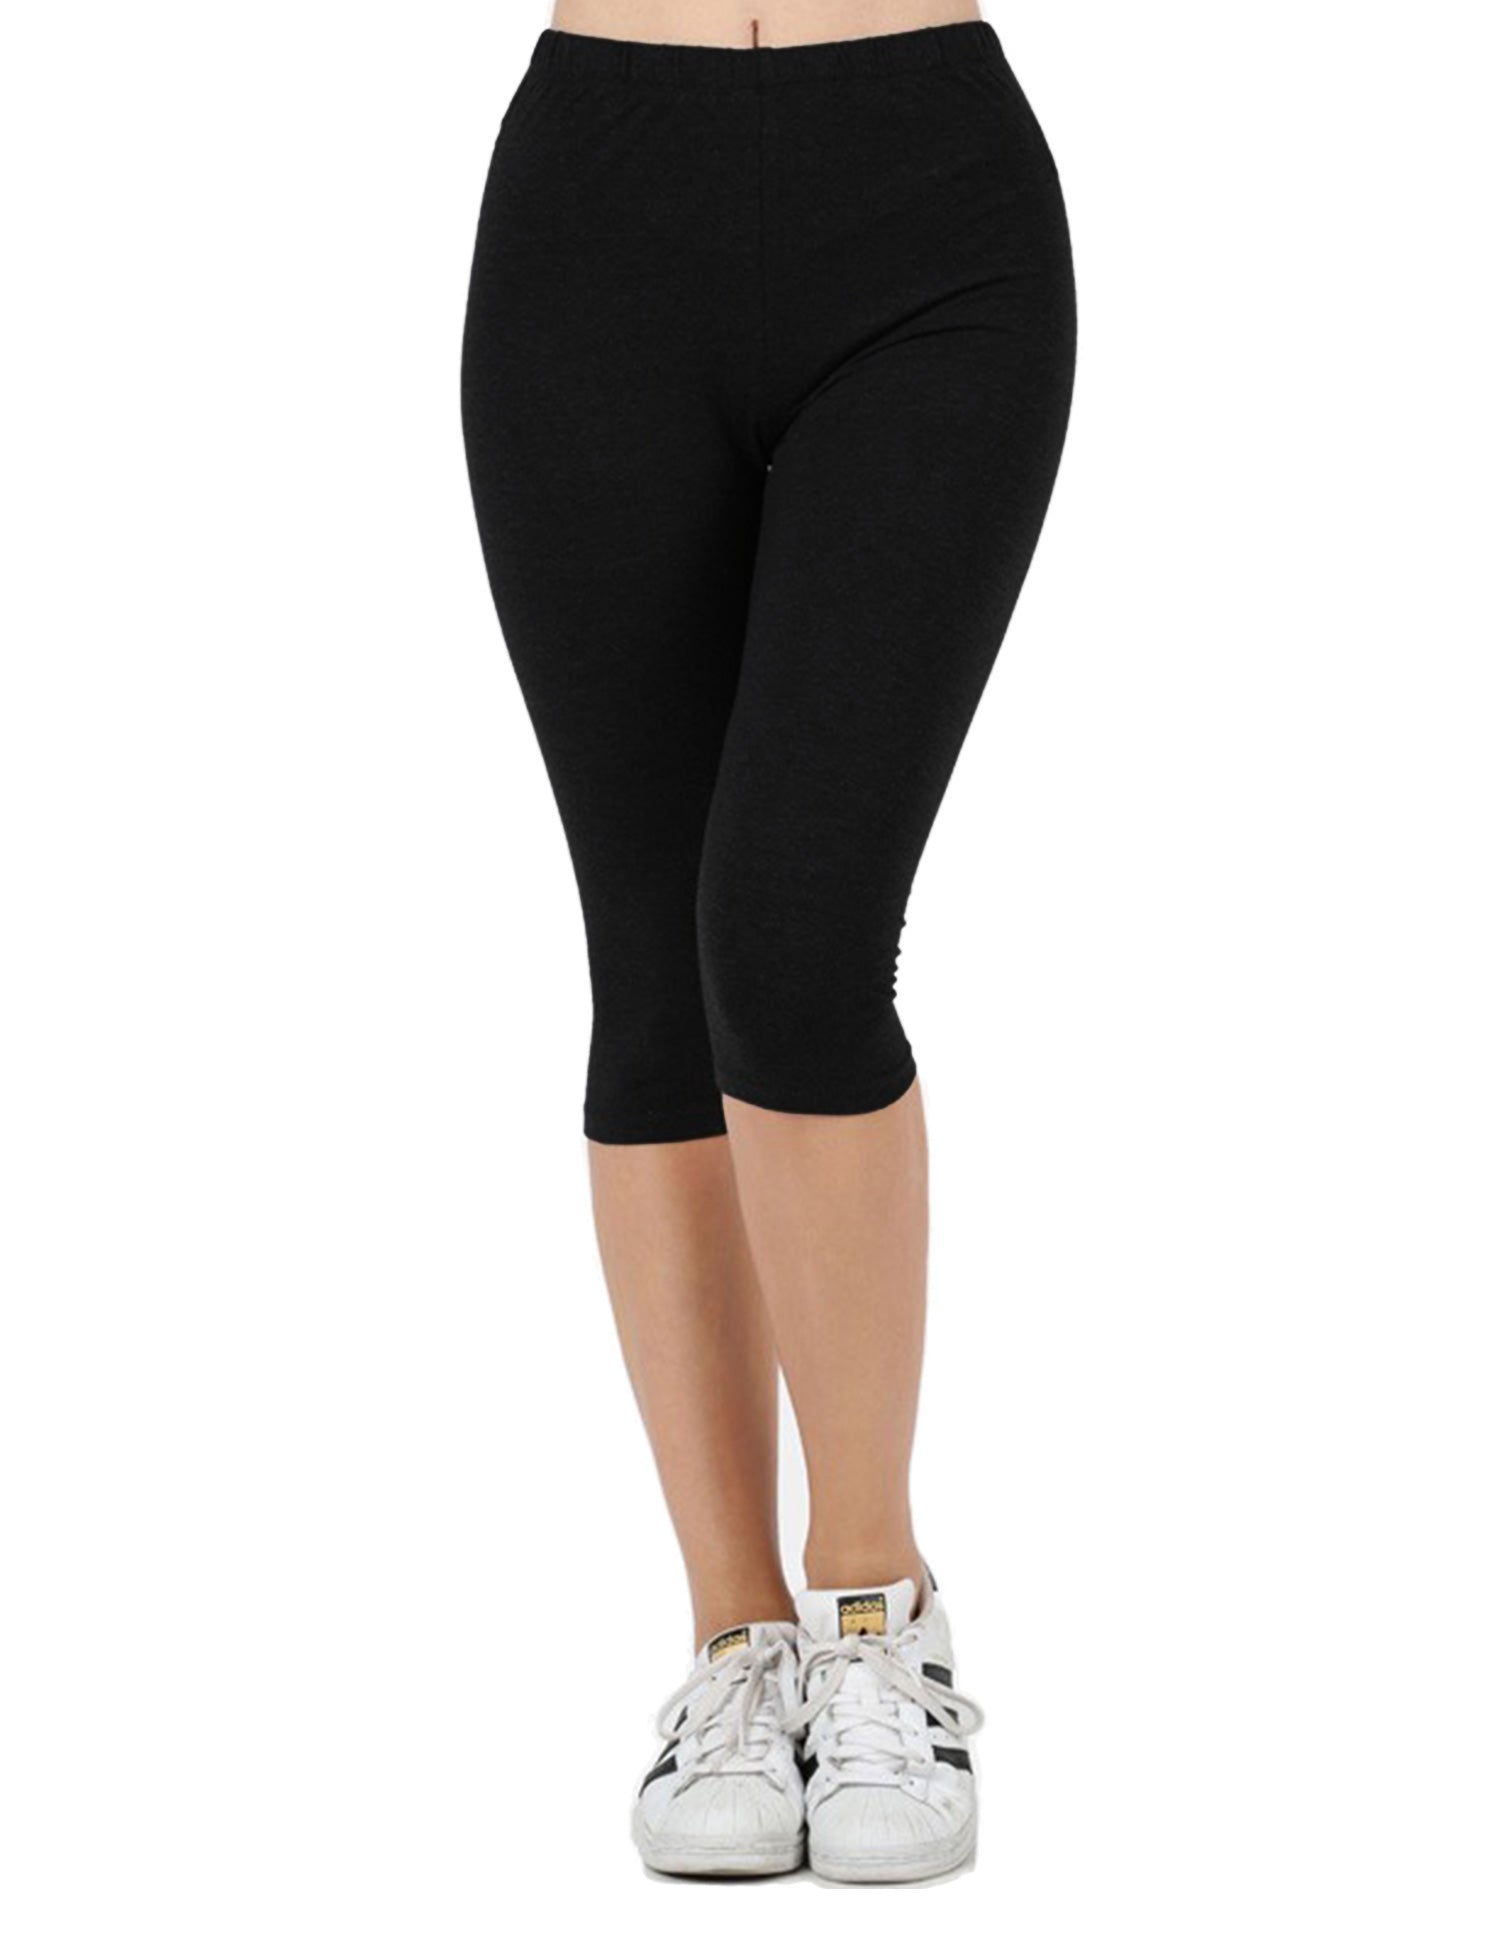 Sale on 800+ Capri Leggings offers and gifts